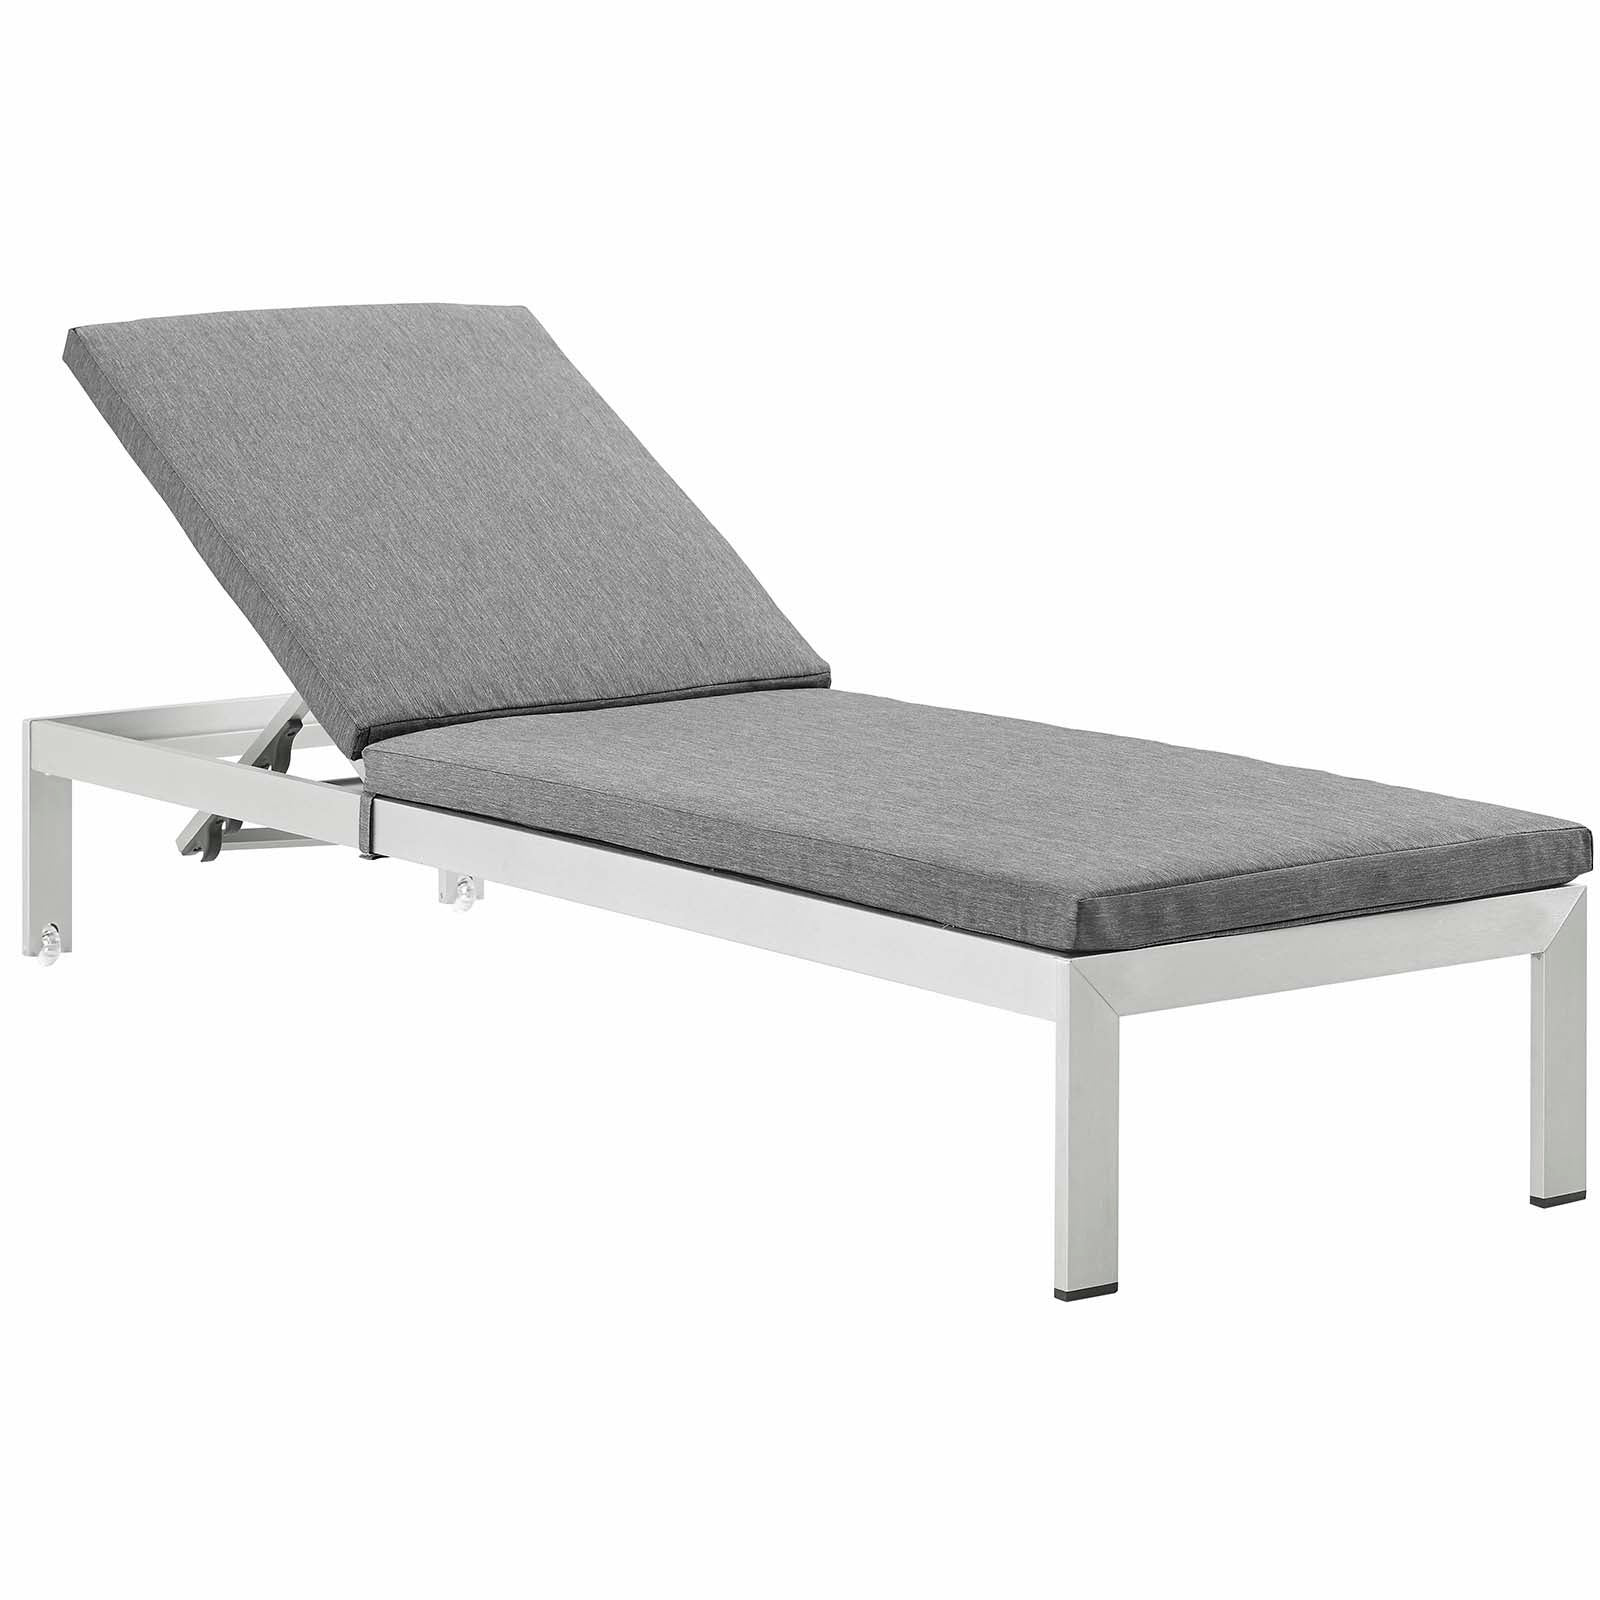 Shore Chaise with Cushions Outdoor Patio Aluminum Set of 6-Outdoor Set-Modway-Wall2Wall Furnishings